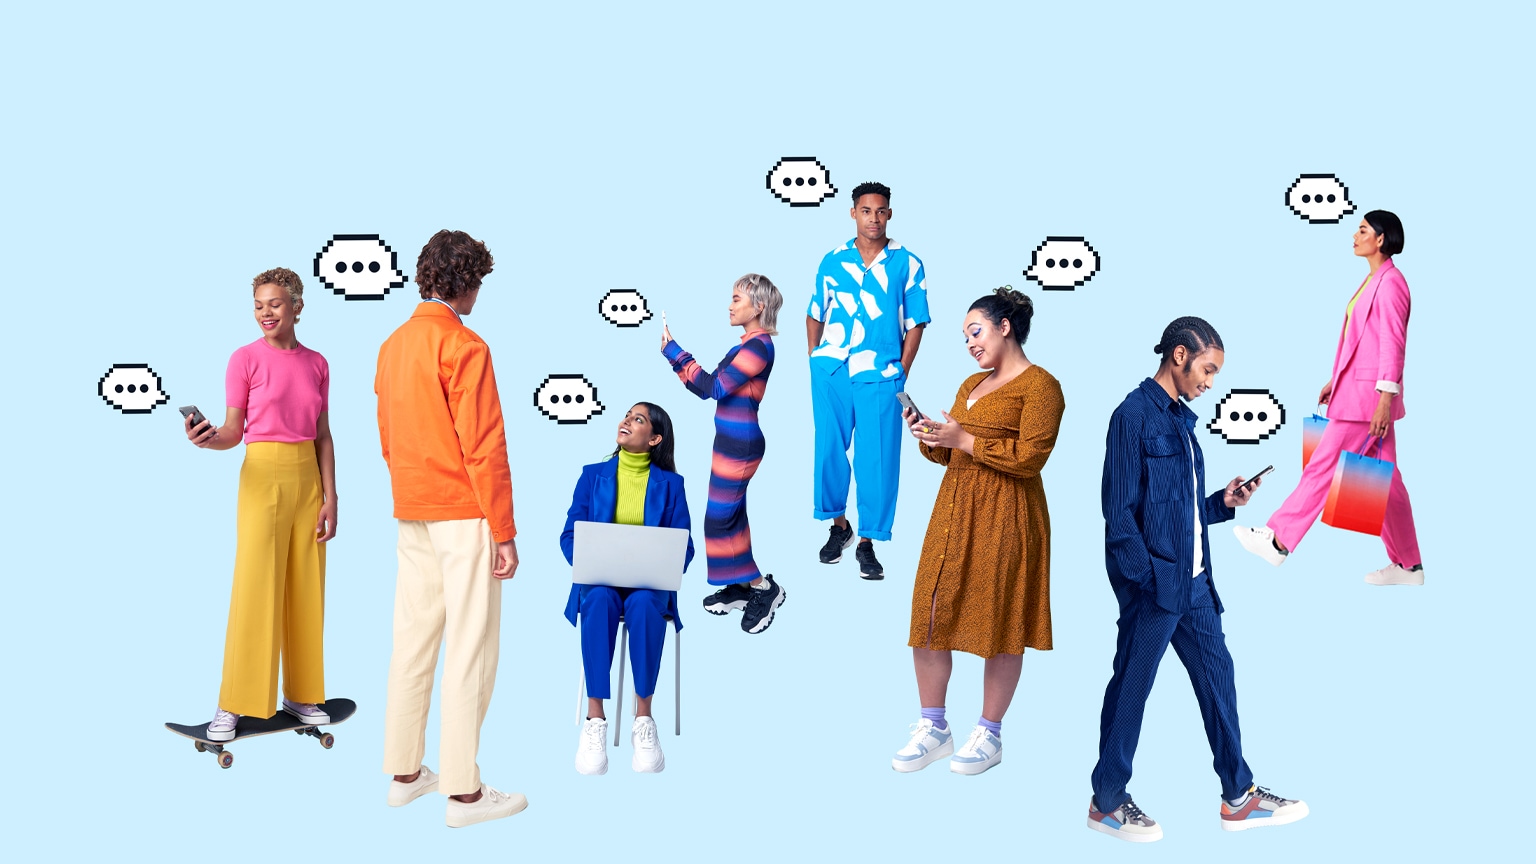 Image of various young people with thought bubbles next to their heads